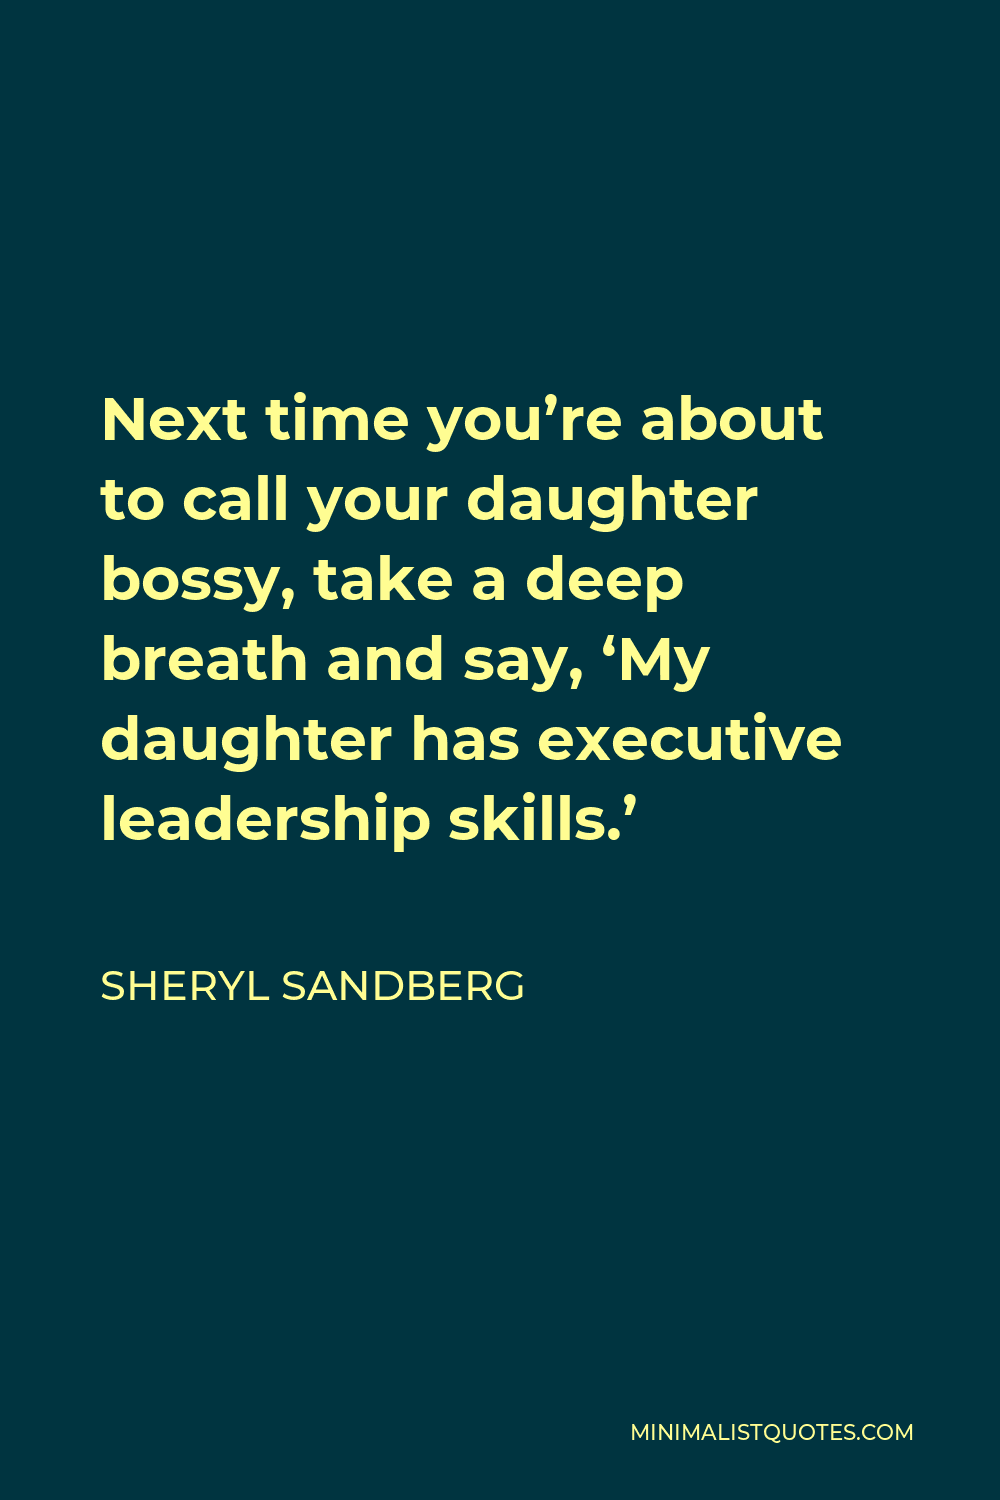 Sheryl Sandberg Quote - Next time you’re about to call your daughter bossy, take a deep breath and say, ‘My daughter has executive leadership skills.’